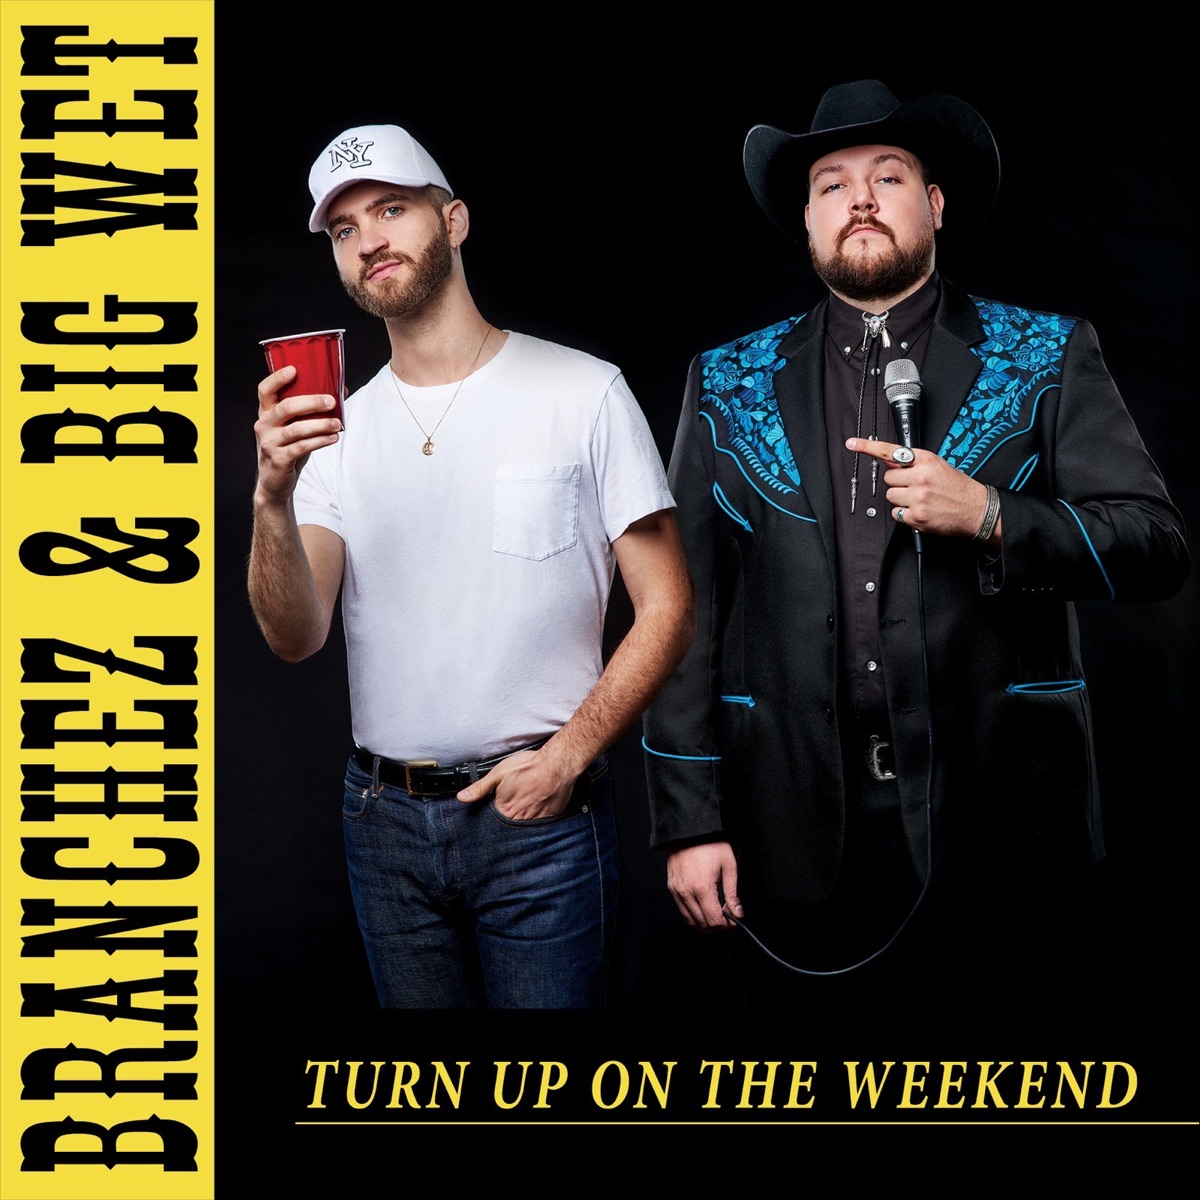 Turn Up On the Weekend - Single by Branchez & Big Wet on Apple Music